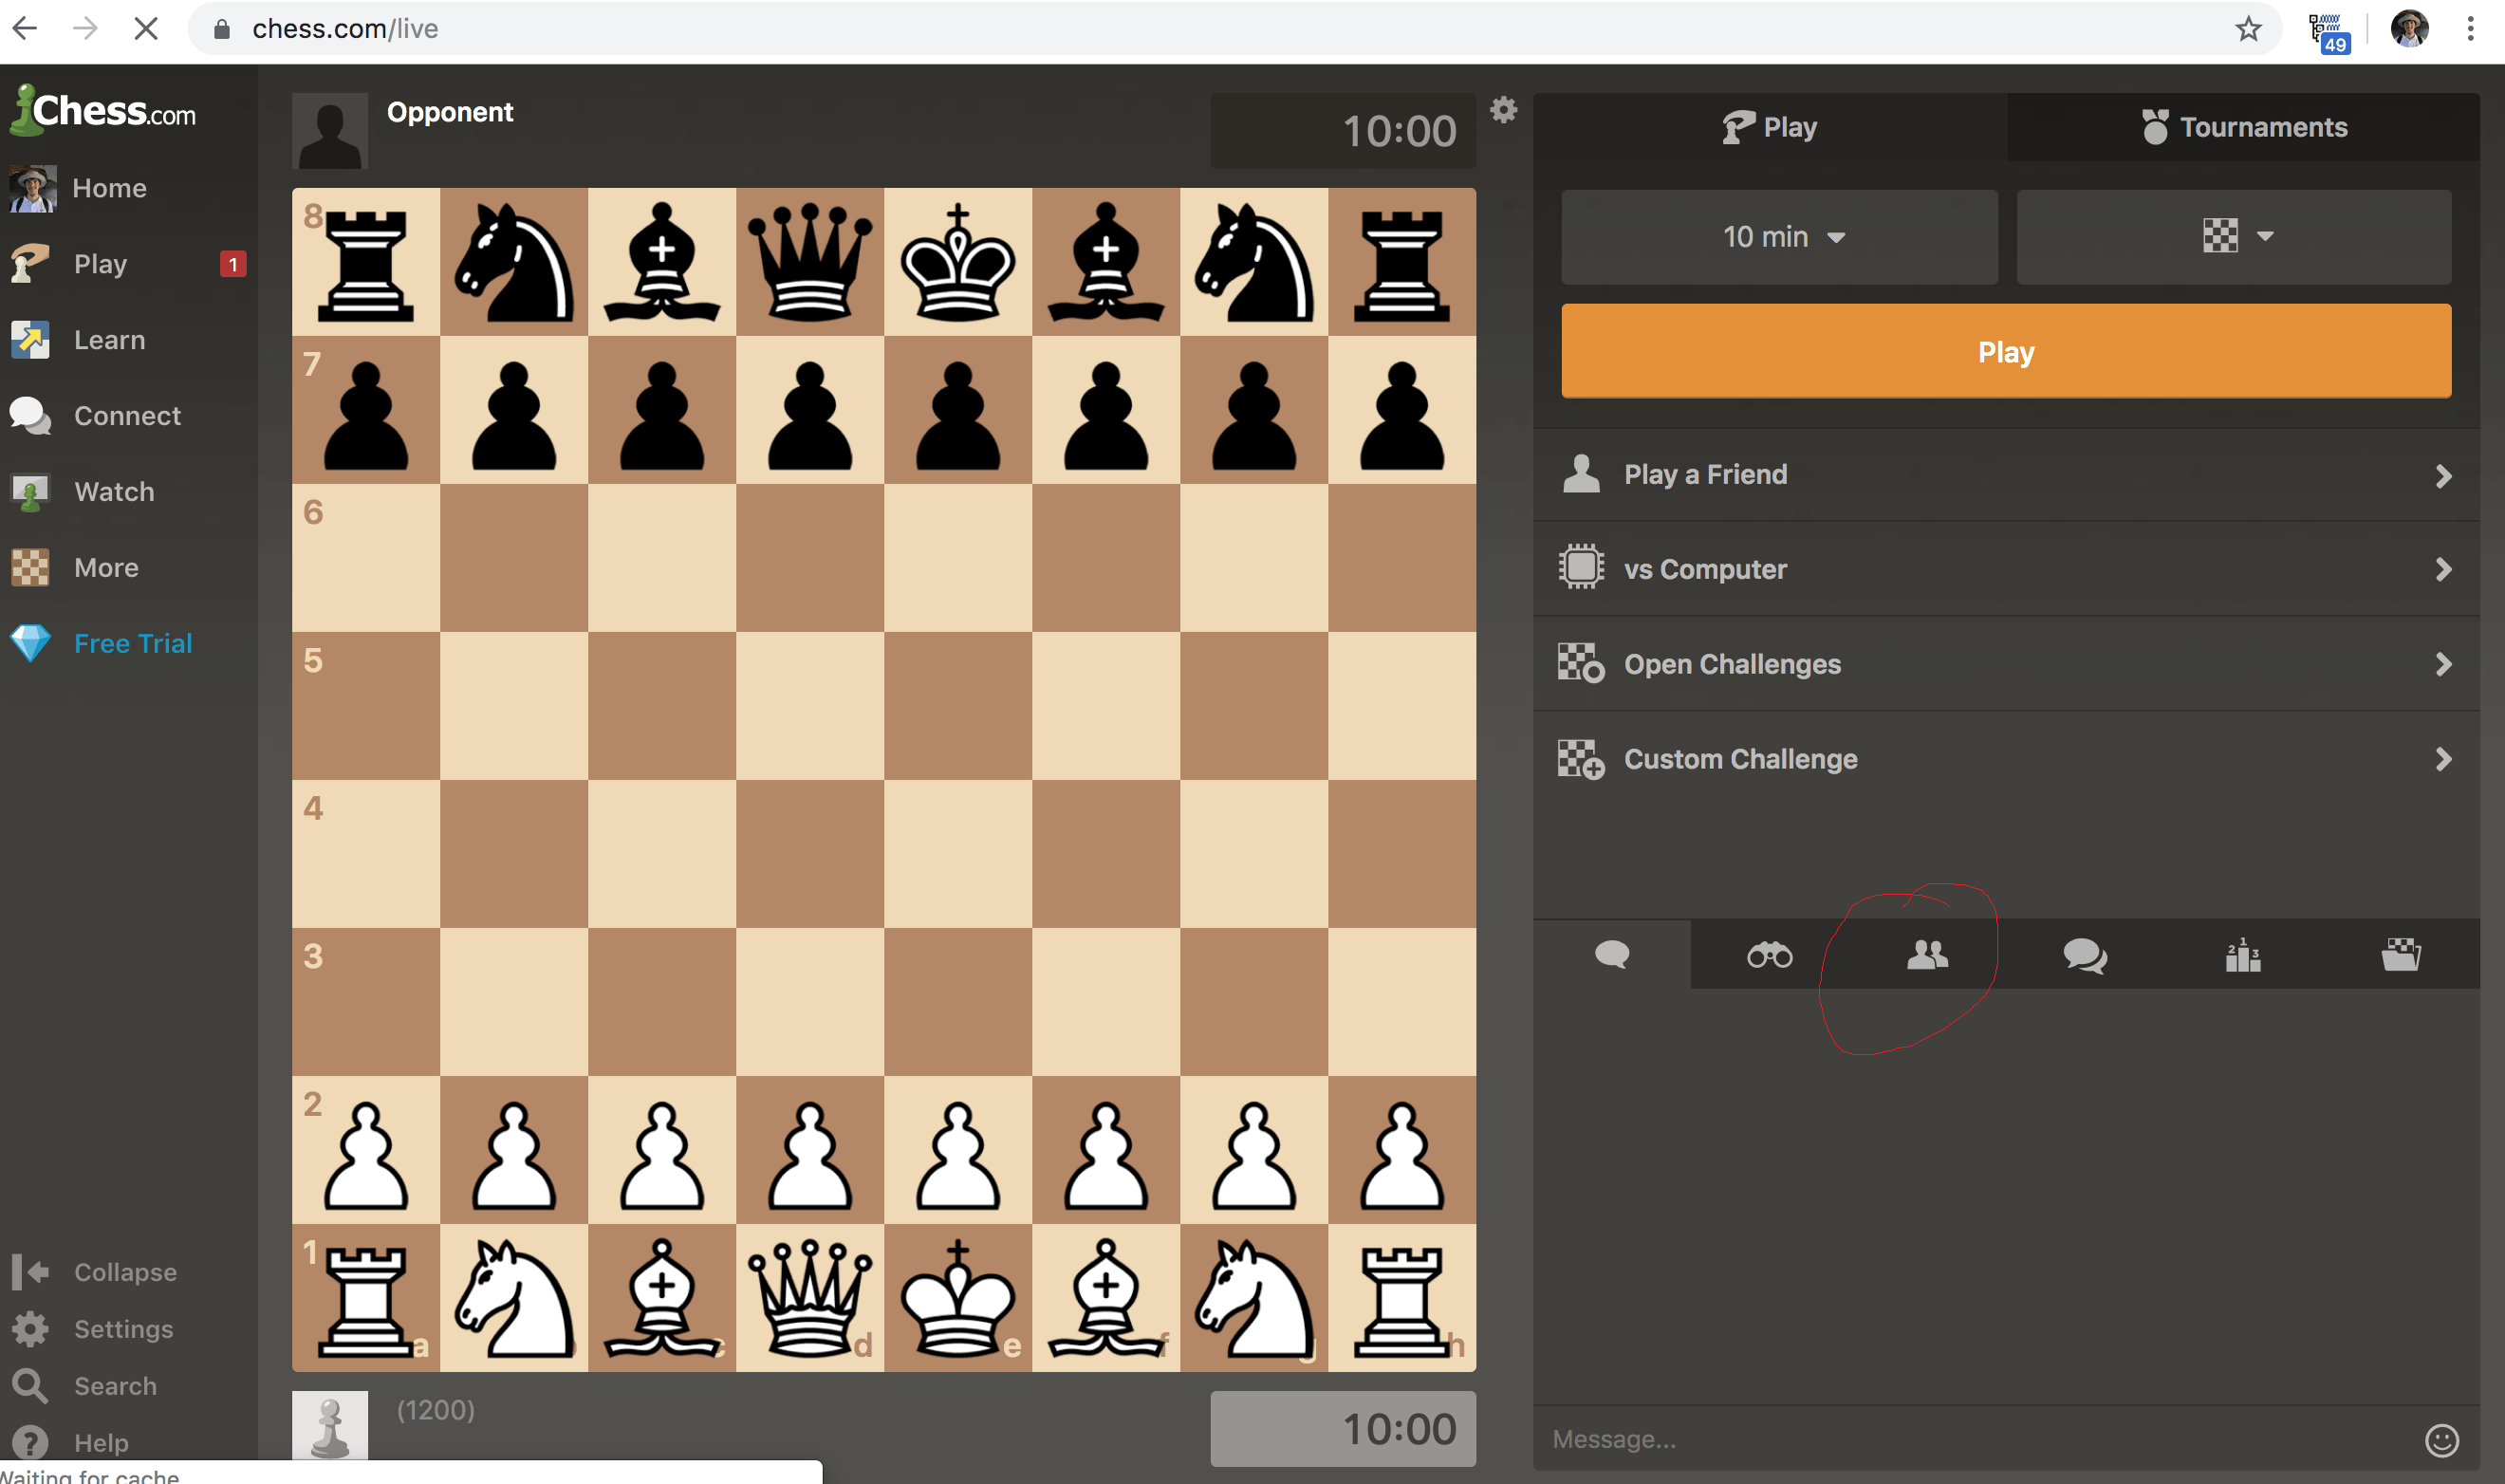 How To Play With Friends On Chess.com 